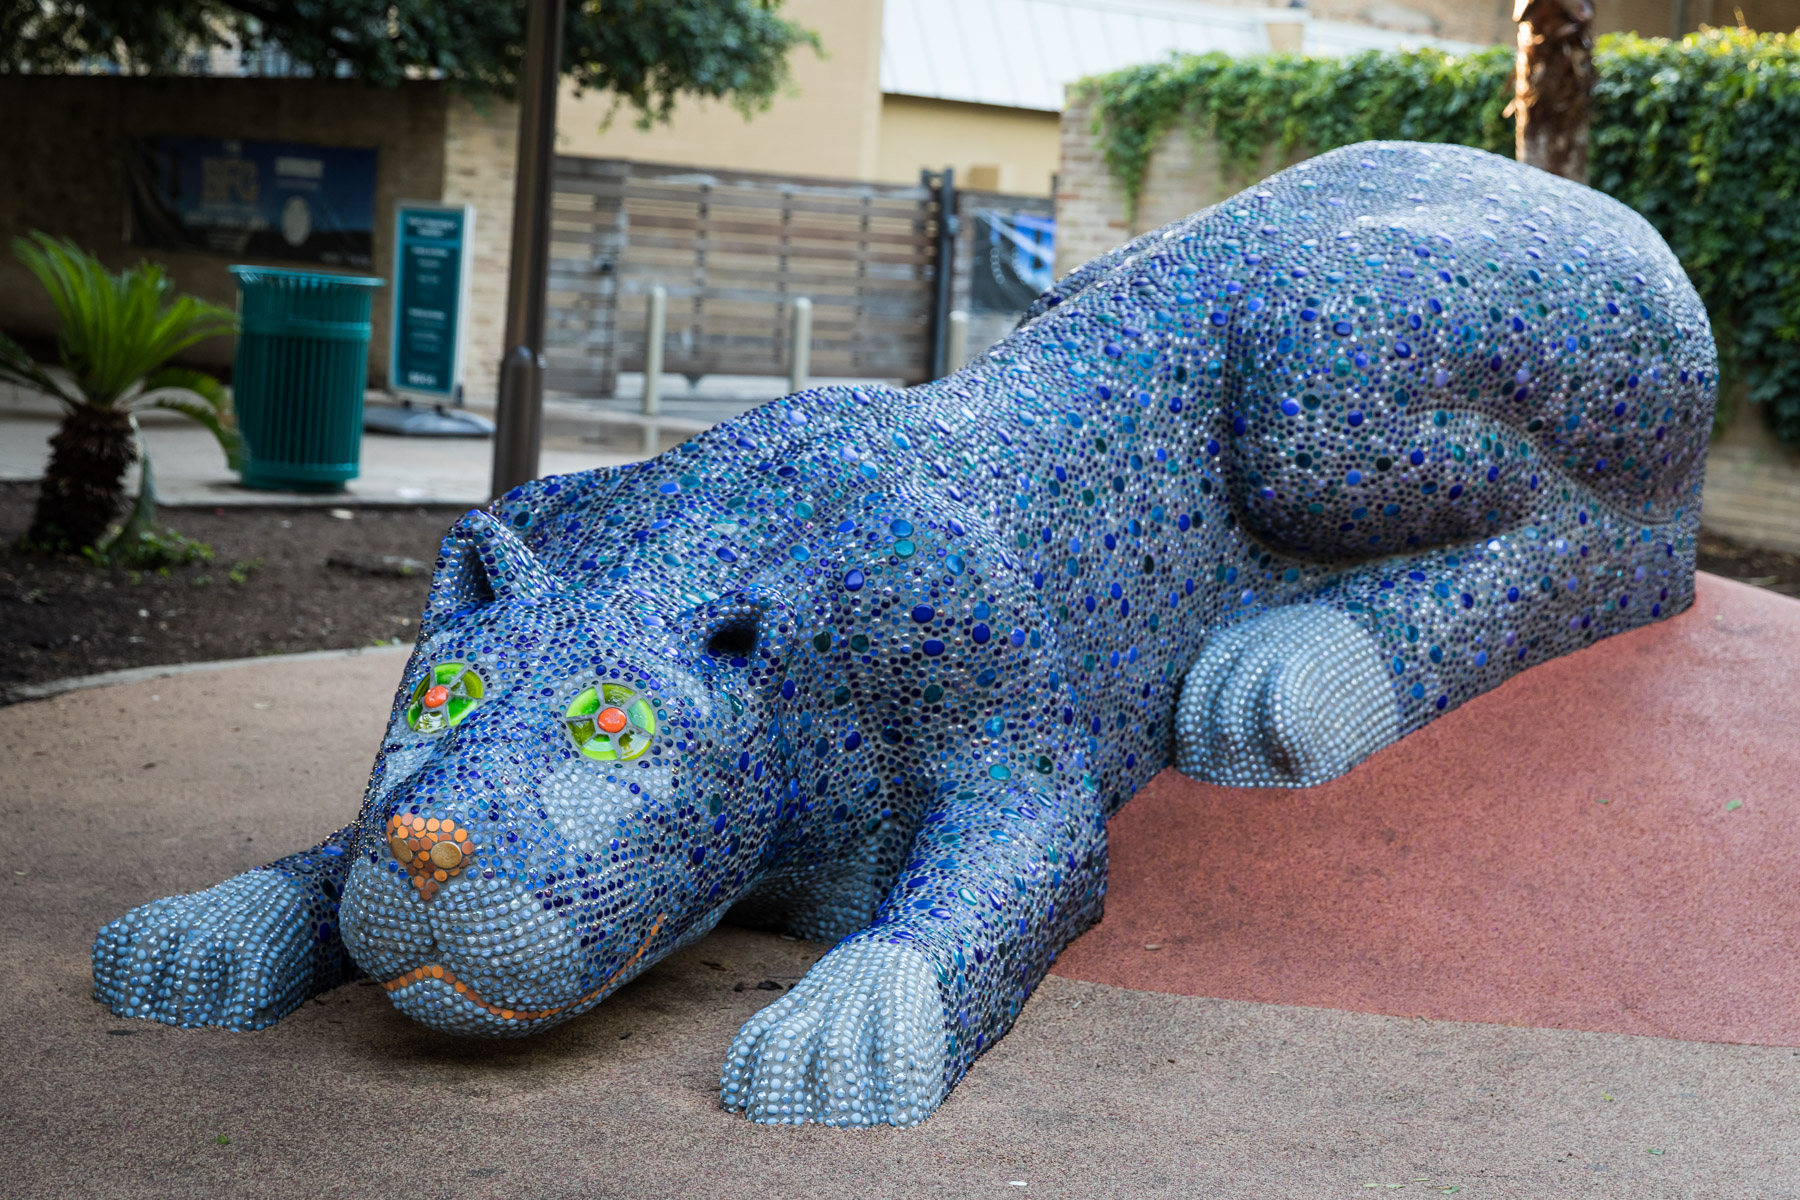 Blue mosaic covered cat sculpture in Yanaguana Garden in Hemisfair for an article on the perfect downtown San Antonio family portrait itinerary